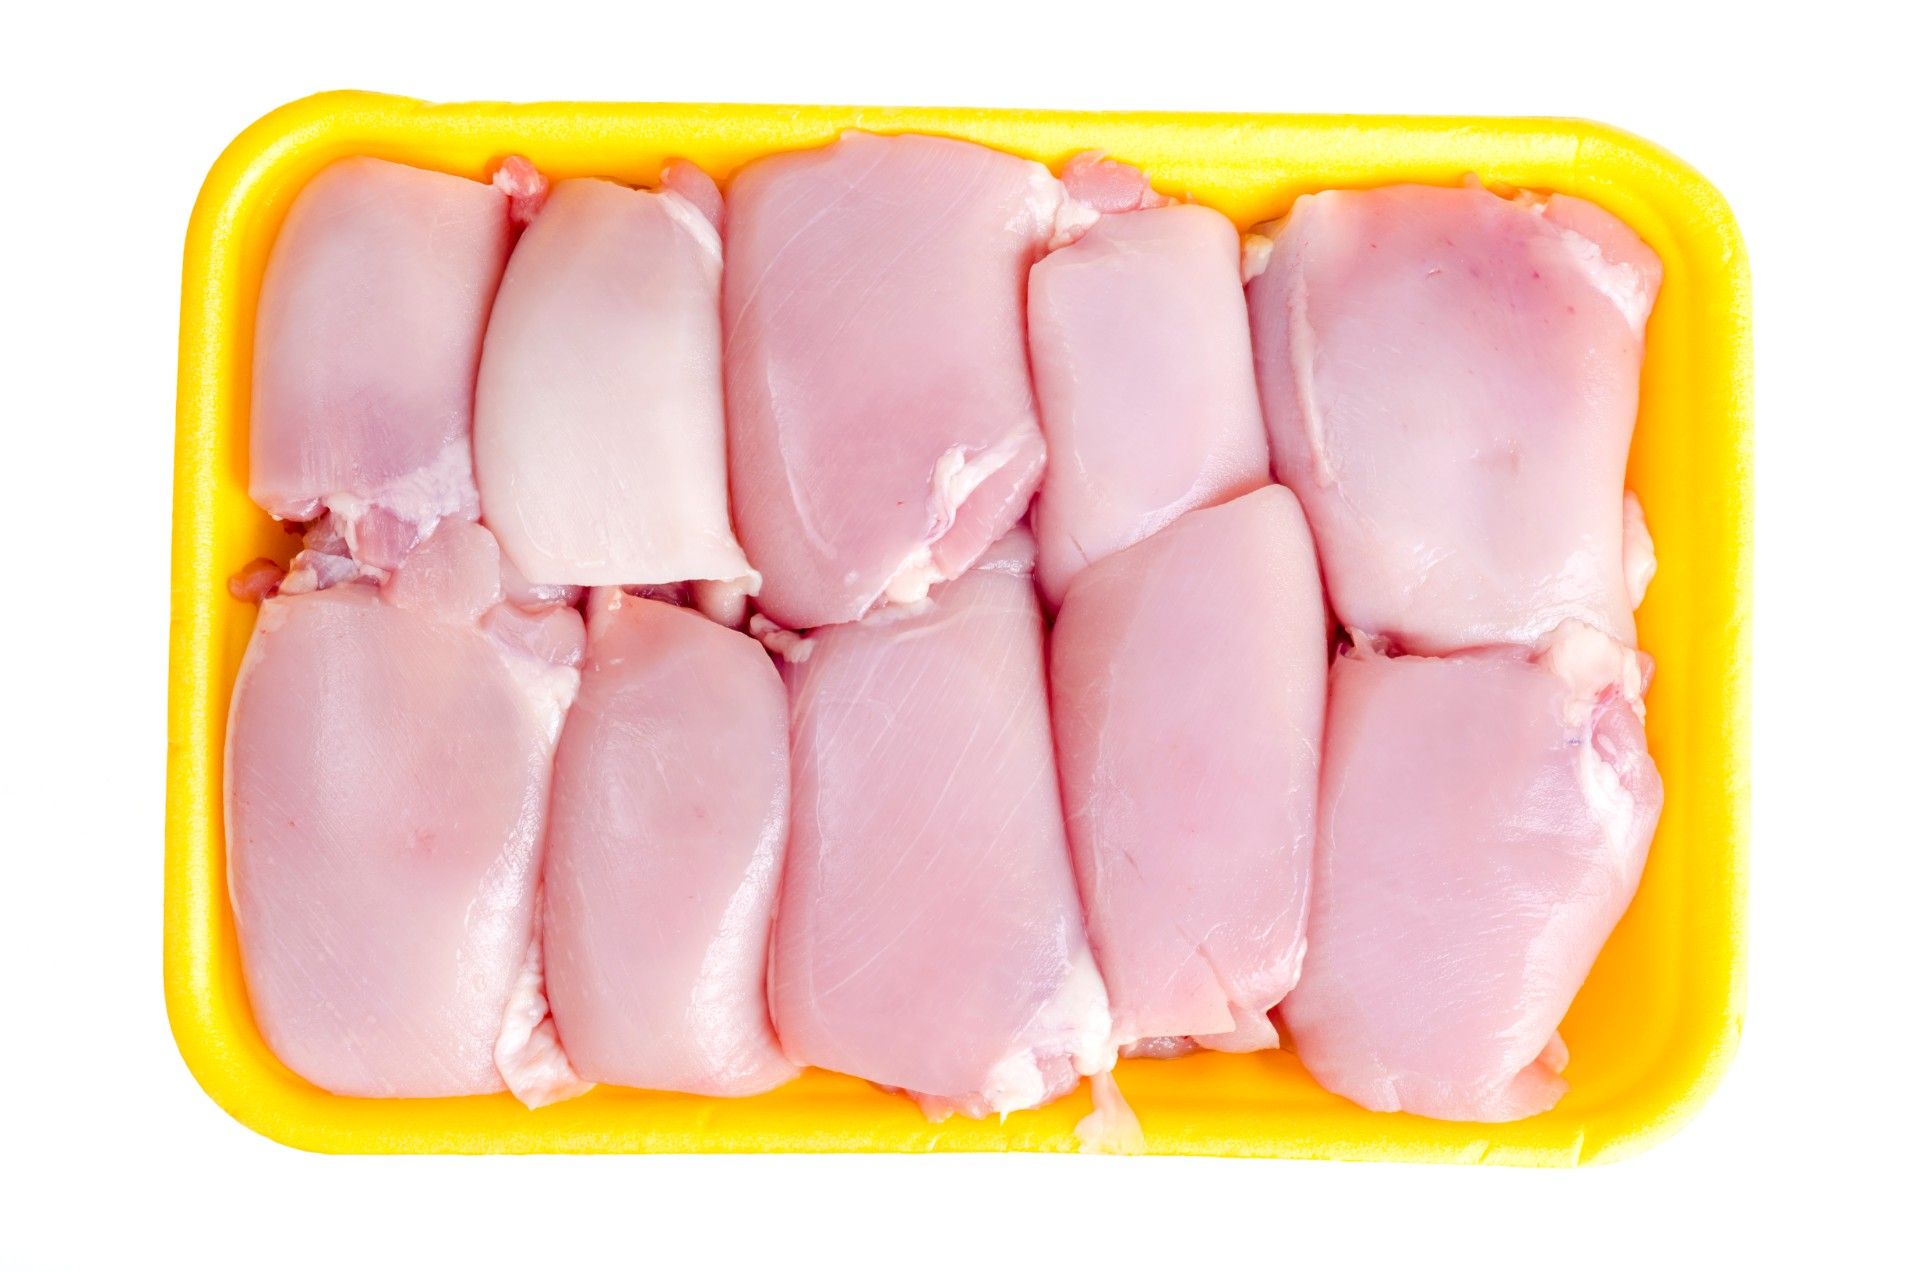 Raw chicken breast in a yellow tray - listeria